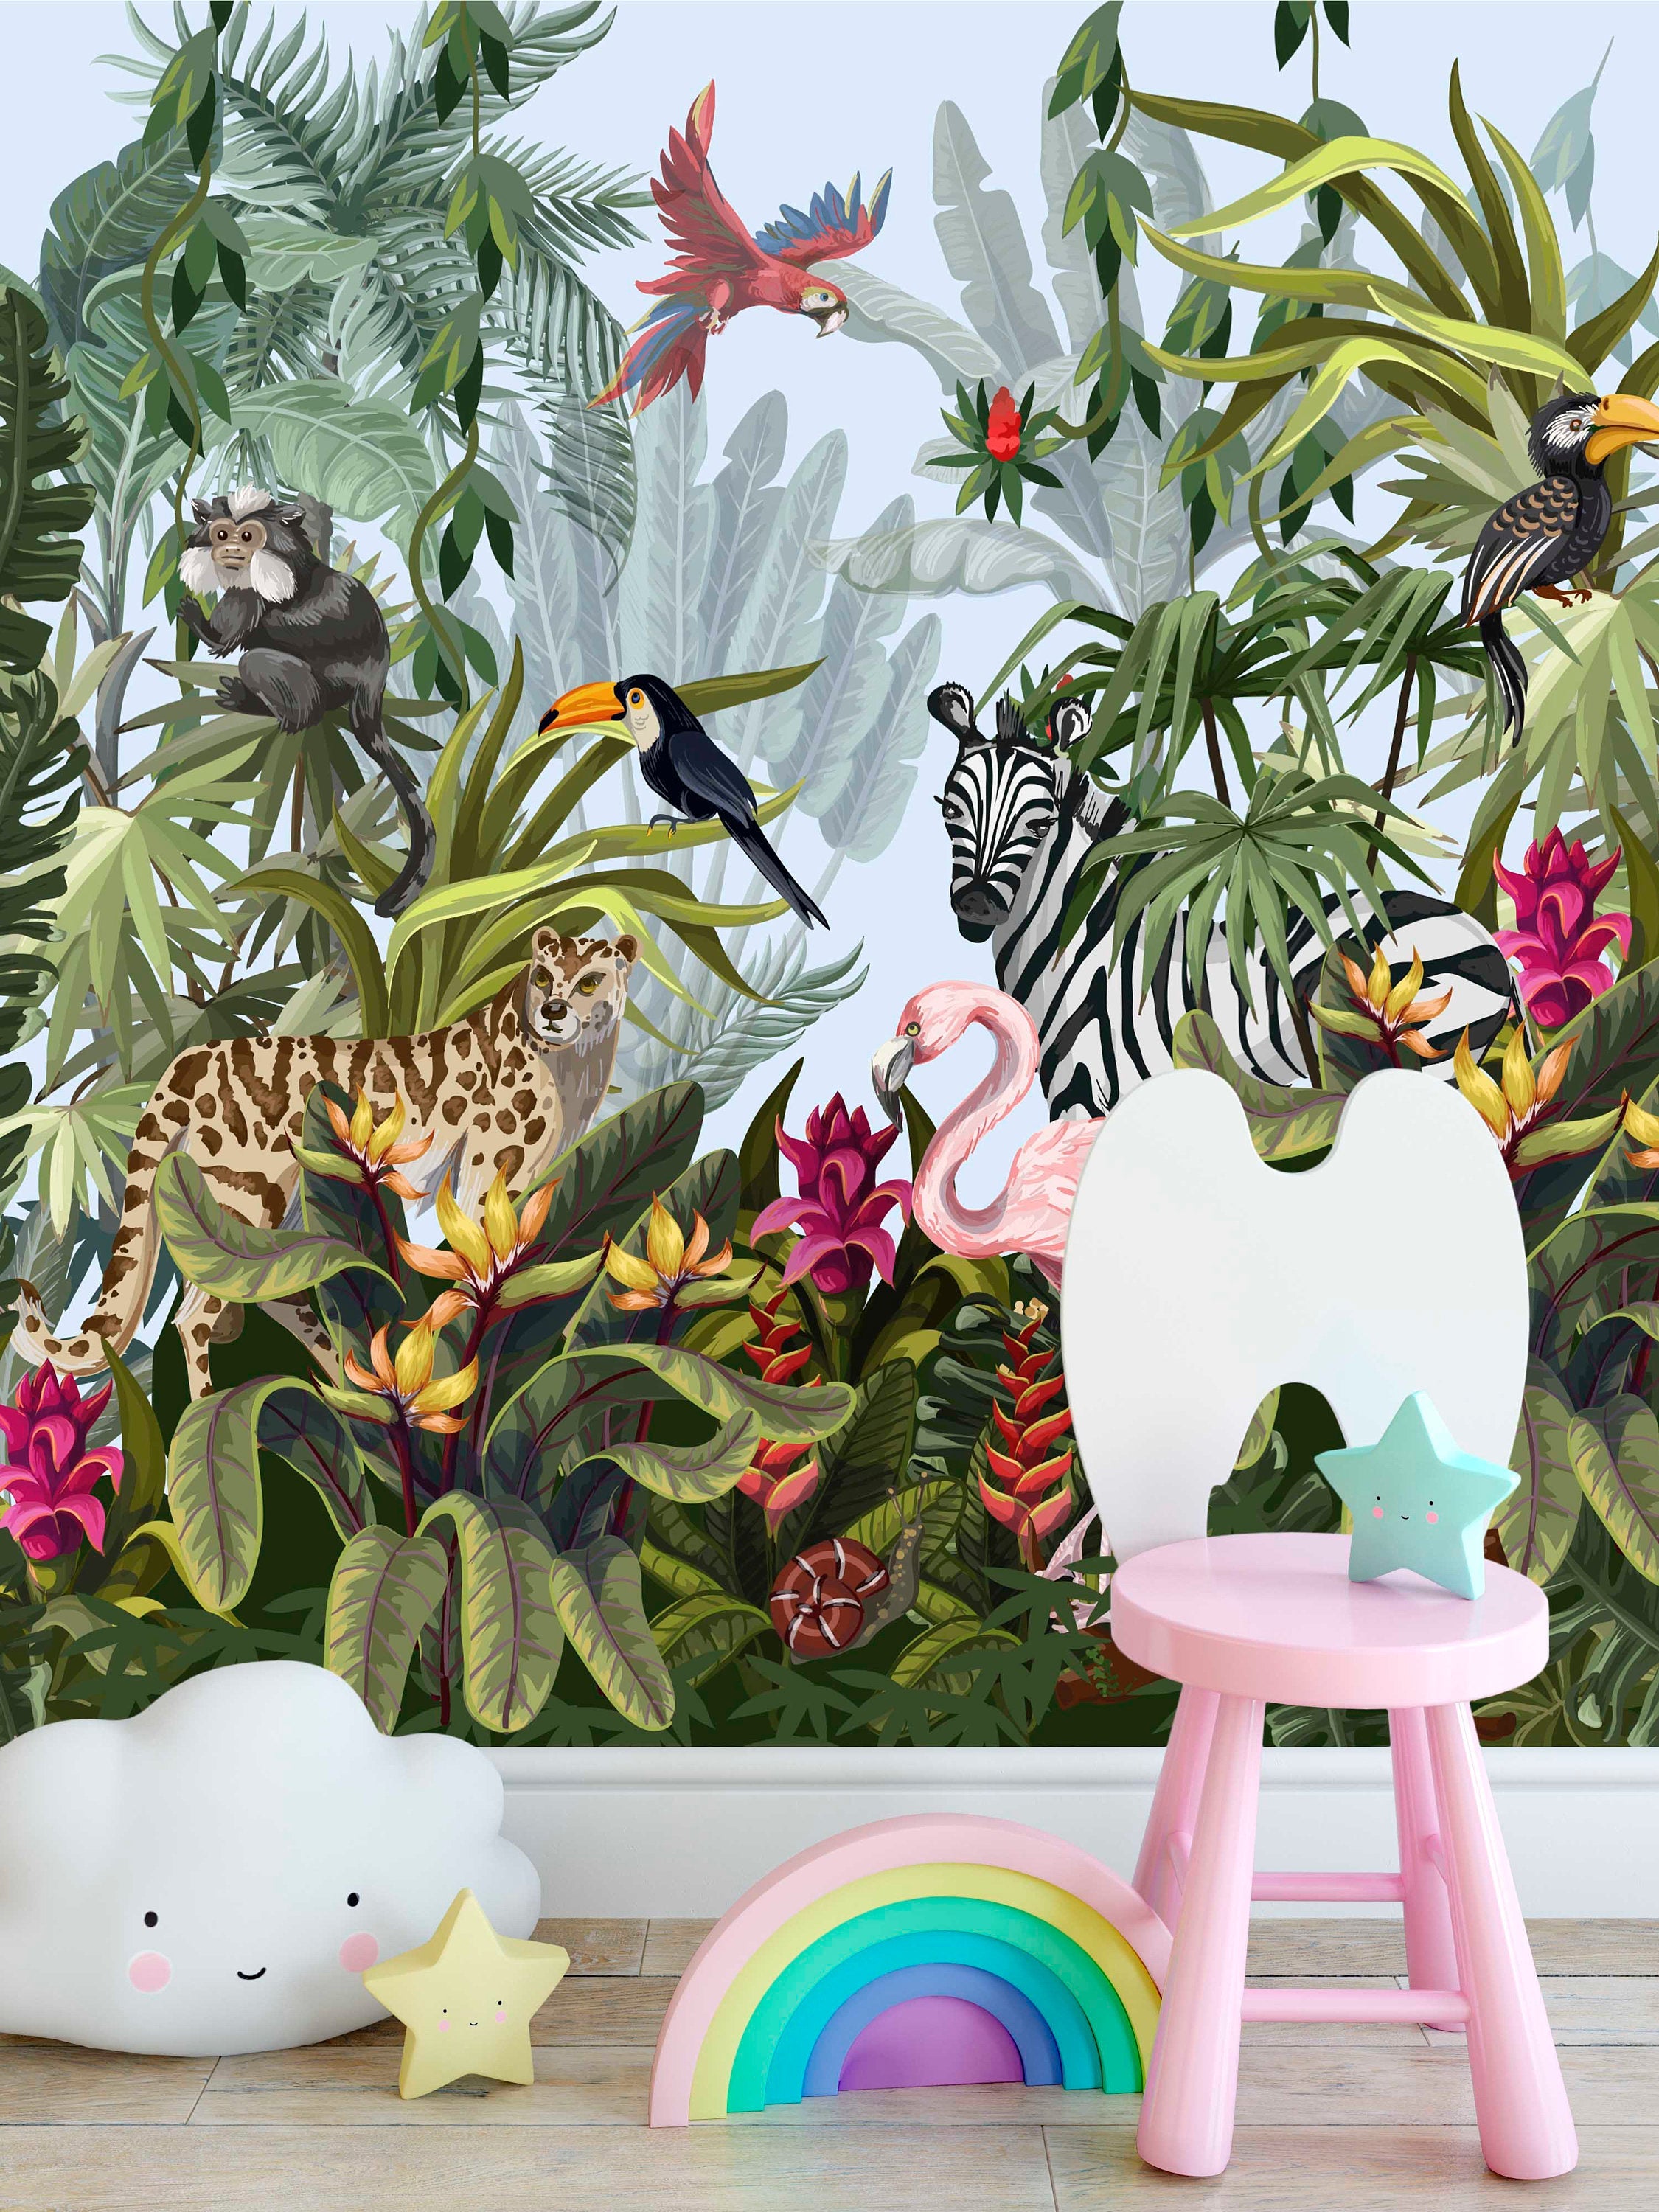 Wild Animals Tropical Jungle Colorful Flowers Floral Wallpaper